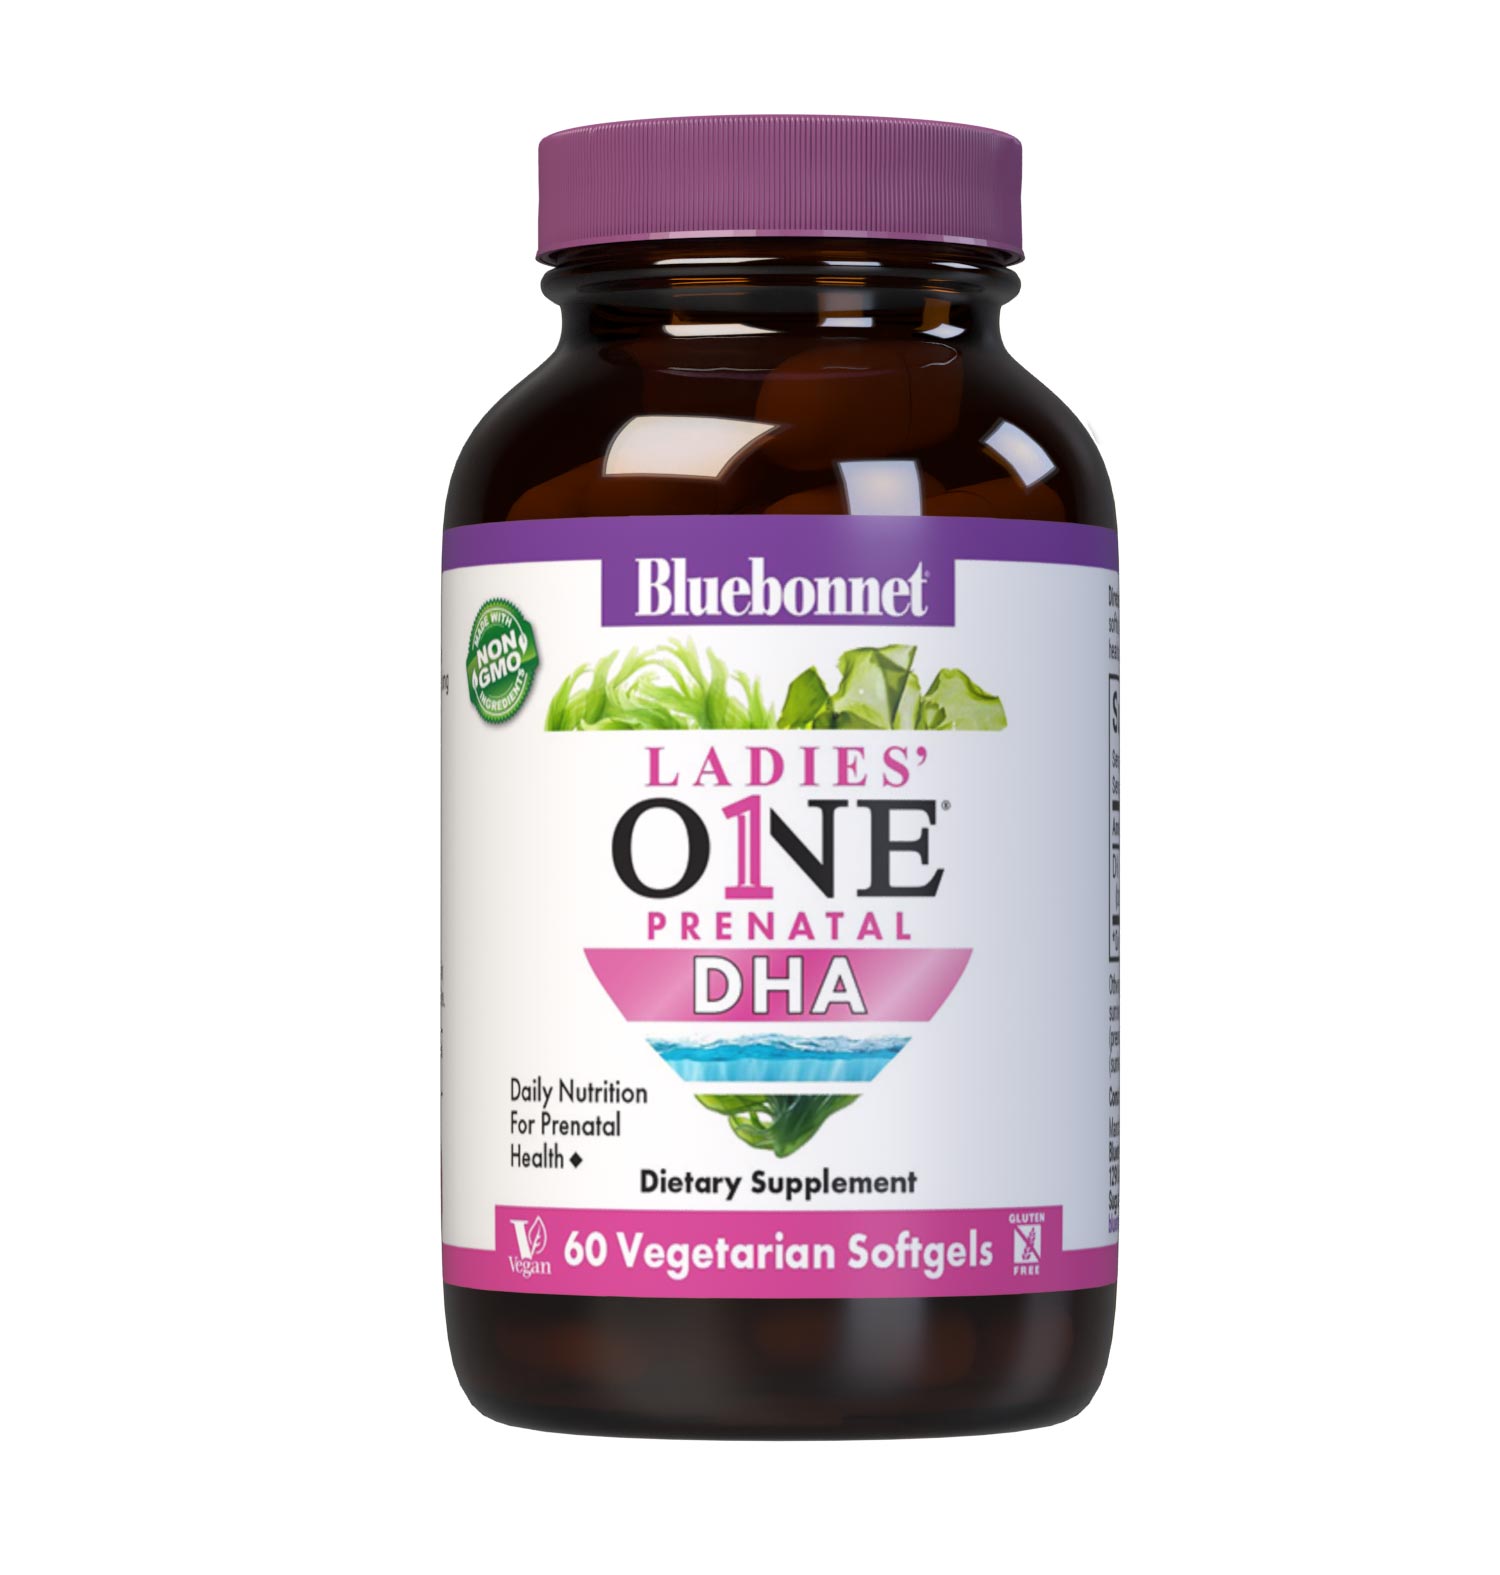 Bluebonnet's Ladies' One Prenatal DHA is formulated with life’sDHA®, a vegetable-based docosahexaenoic acid (DHA) in a triglyceride form derived from marine algae. Life’sDHA® is a complement to any woman’s diet during pregnancy and/or lactation. #size_ 60 count